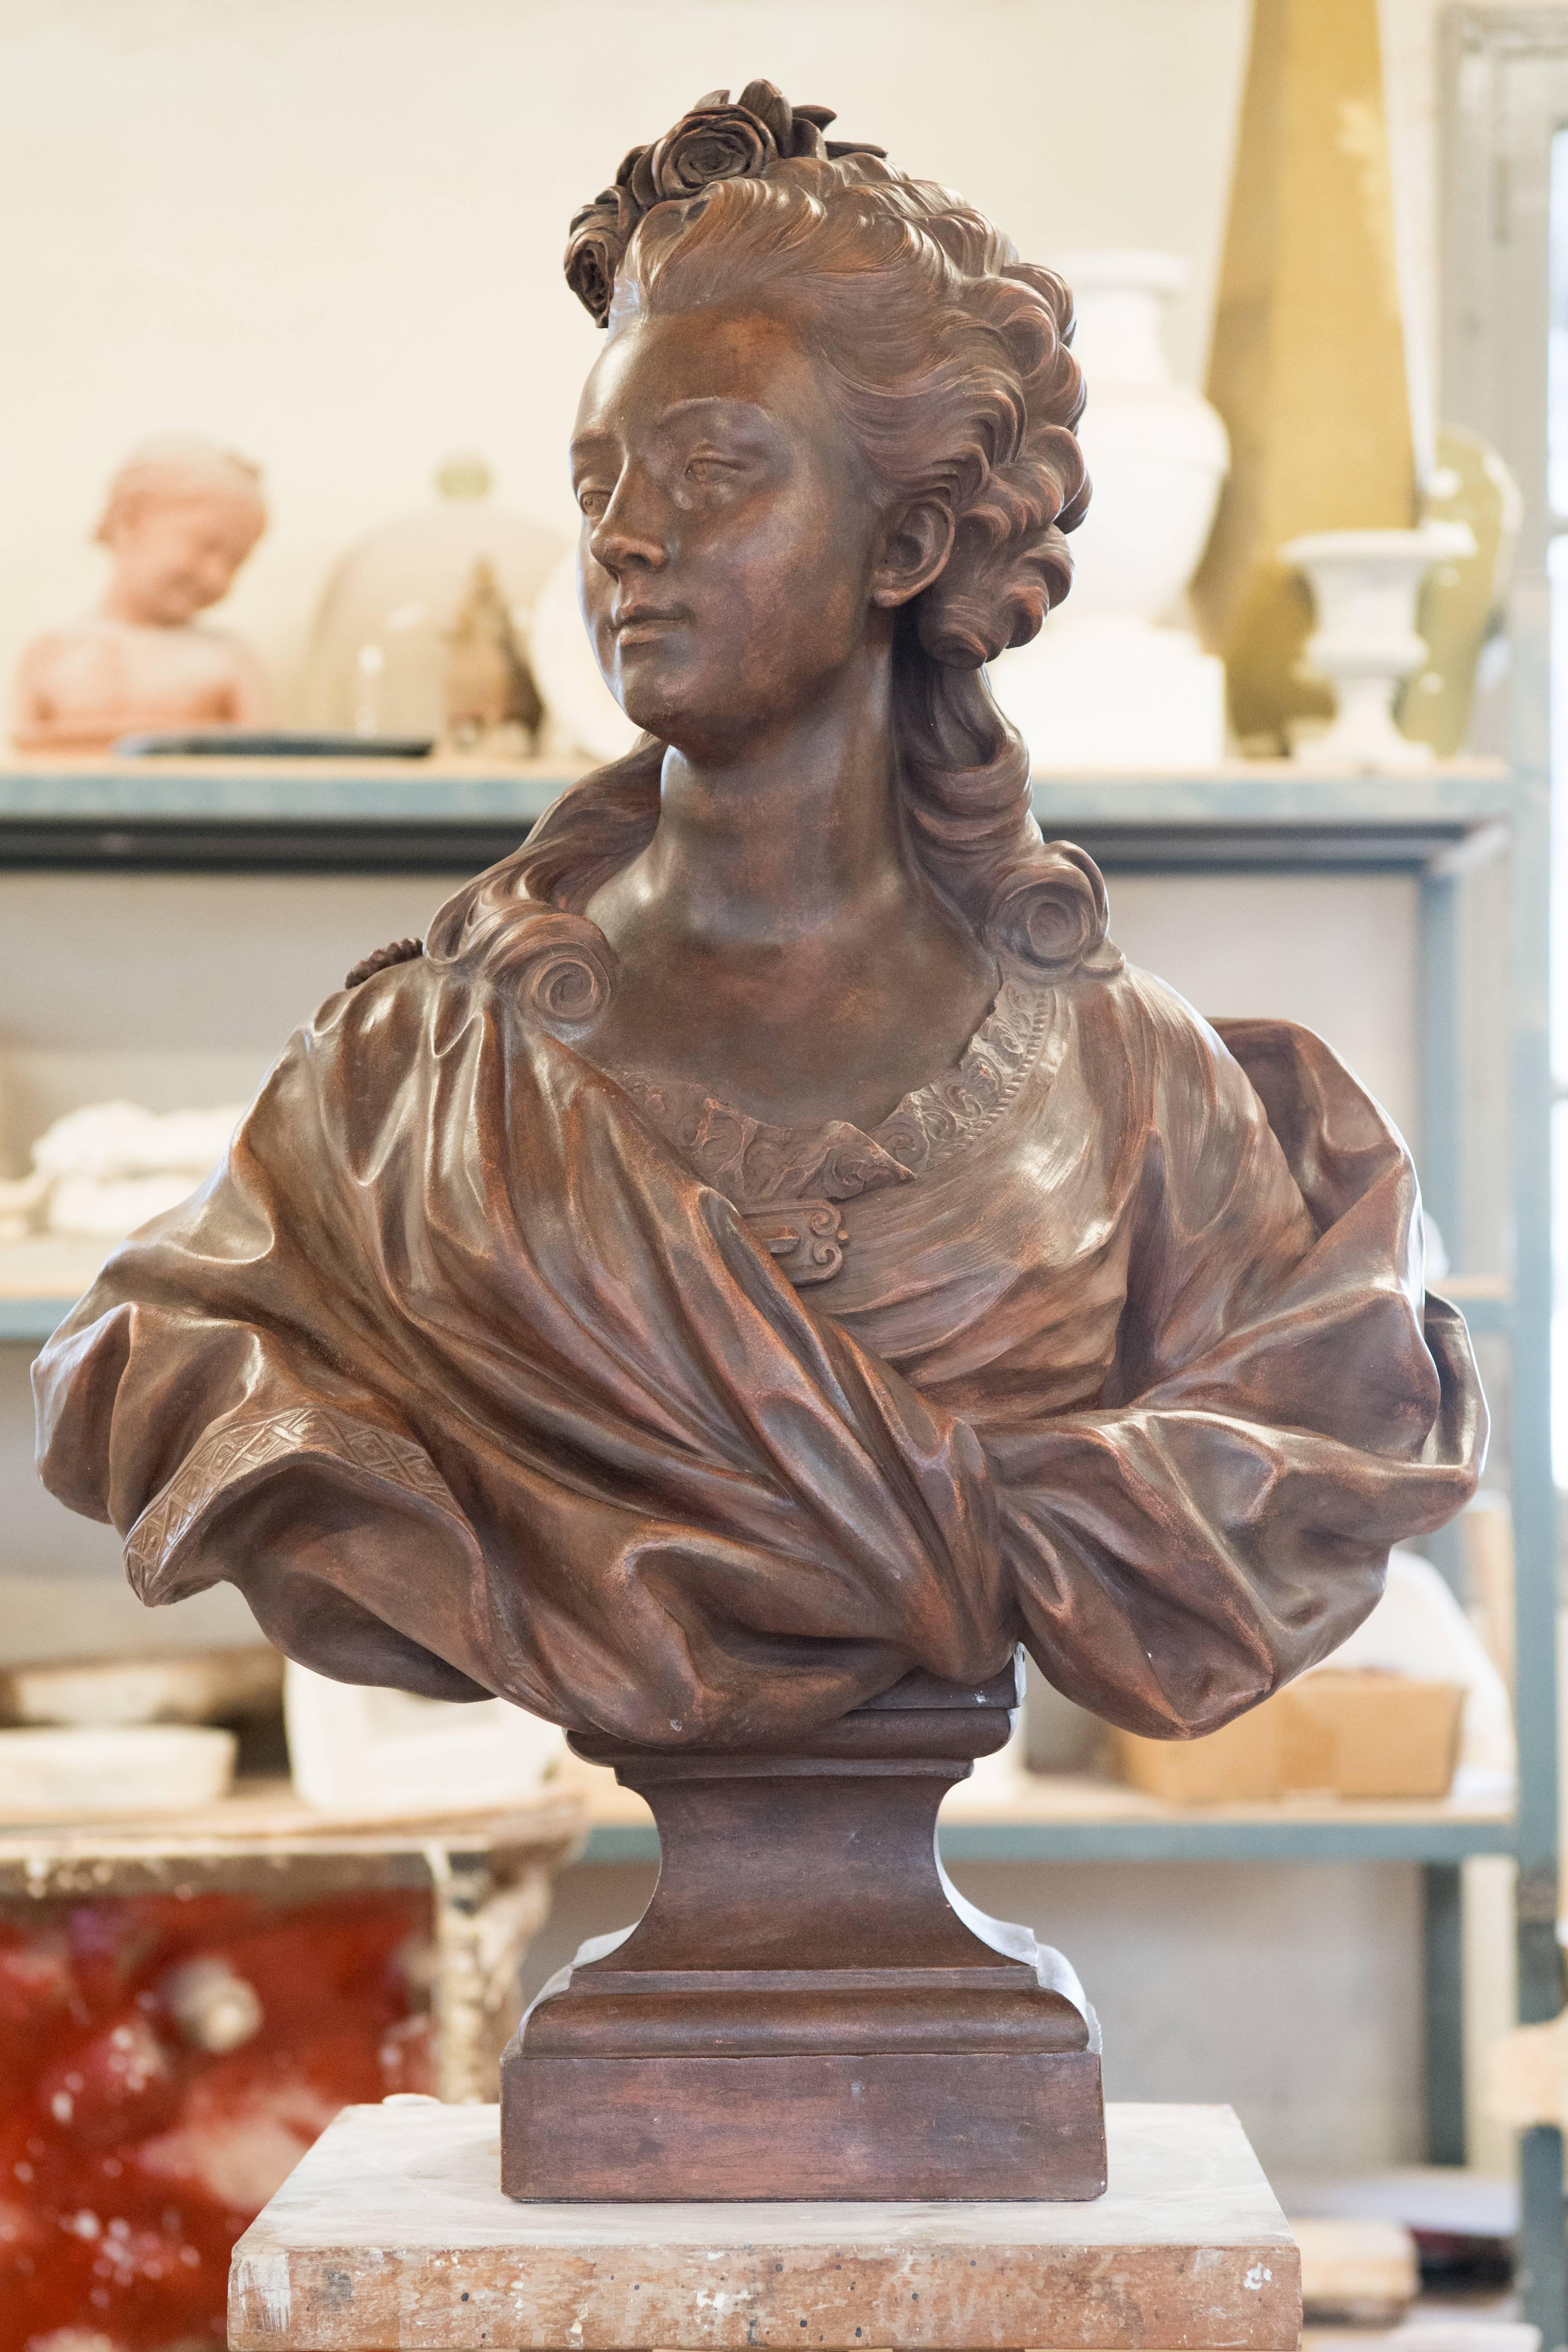 Art Reproduction in terracotta, bust of Marie Antoinette. Measures: H 85 x L 78 x P 35 cm.
Bust of Marie Antoinette.
This large-scale bust of Marie-Antoinette is as rare as it is beautiful. It represents a young Queen of France around 1770, before